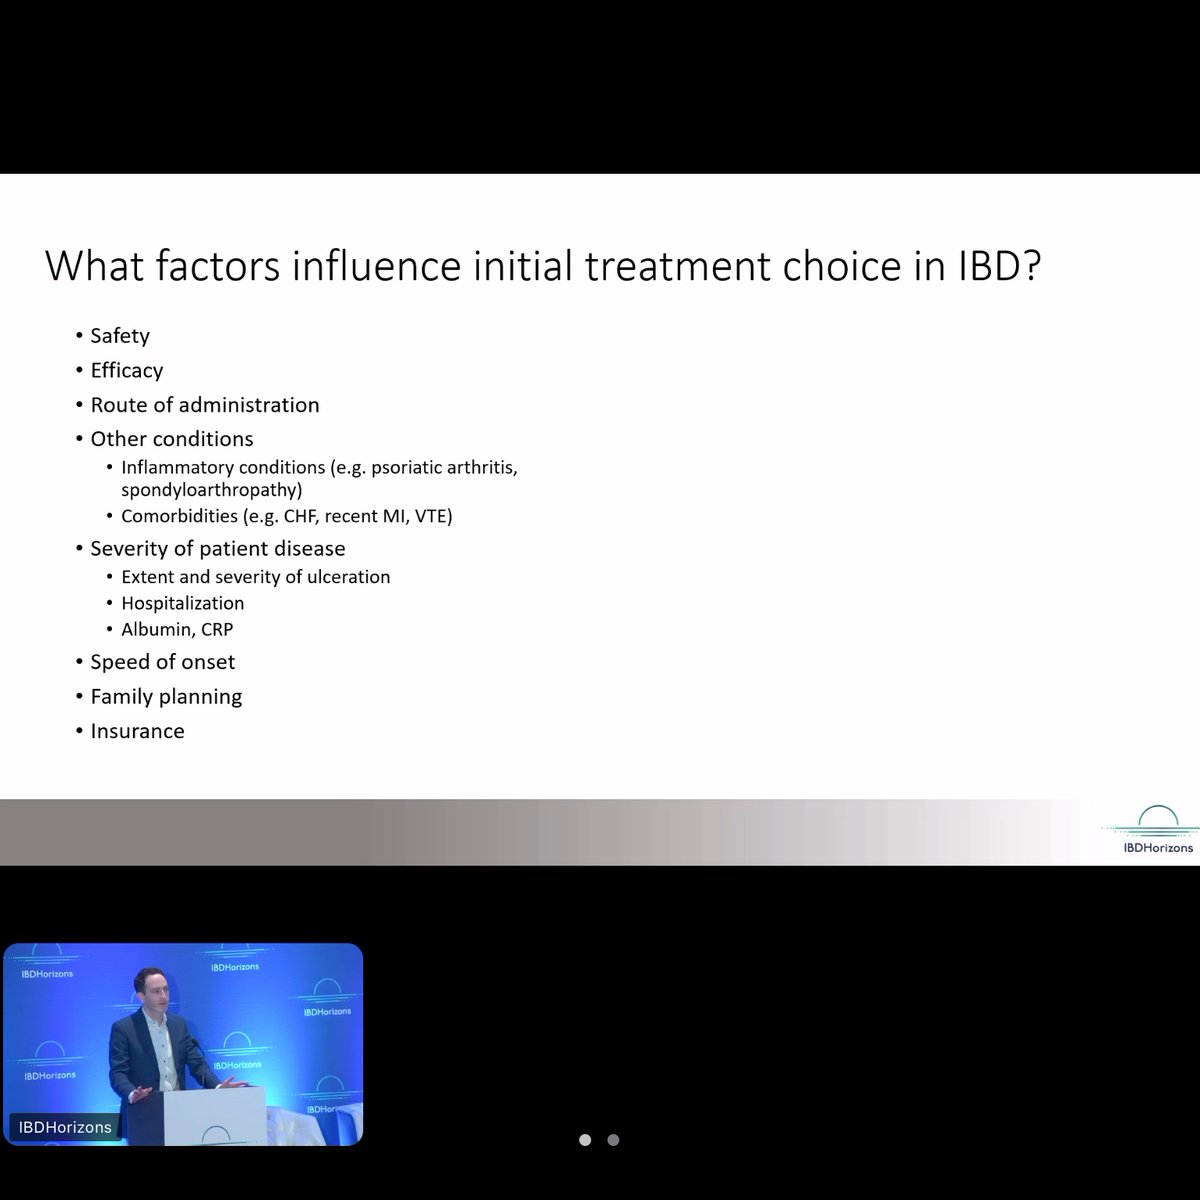 #IBDHorizons24 Jacobs

Treatments & 1st choice factors:
Safety
Efficacy- IFX tends to be default
Delivery - Keep needle phobia pts in mind; VDZ now subq
Comorbidities - communicate with rheum colleagues who use these #IBD meds
Severity of dz
Age of pt
Fight insurance with data